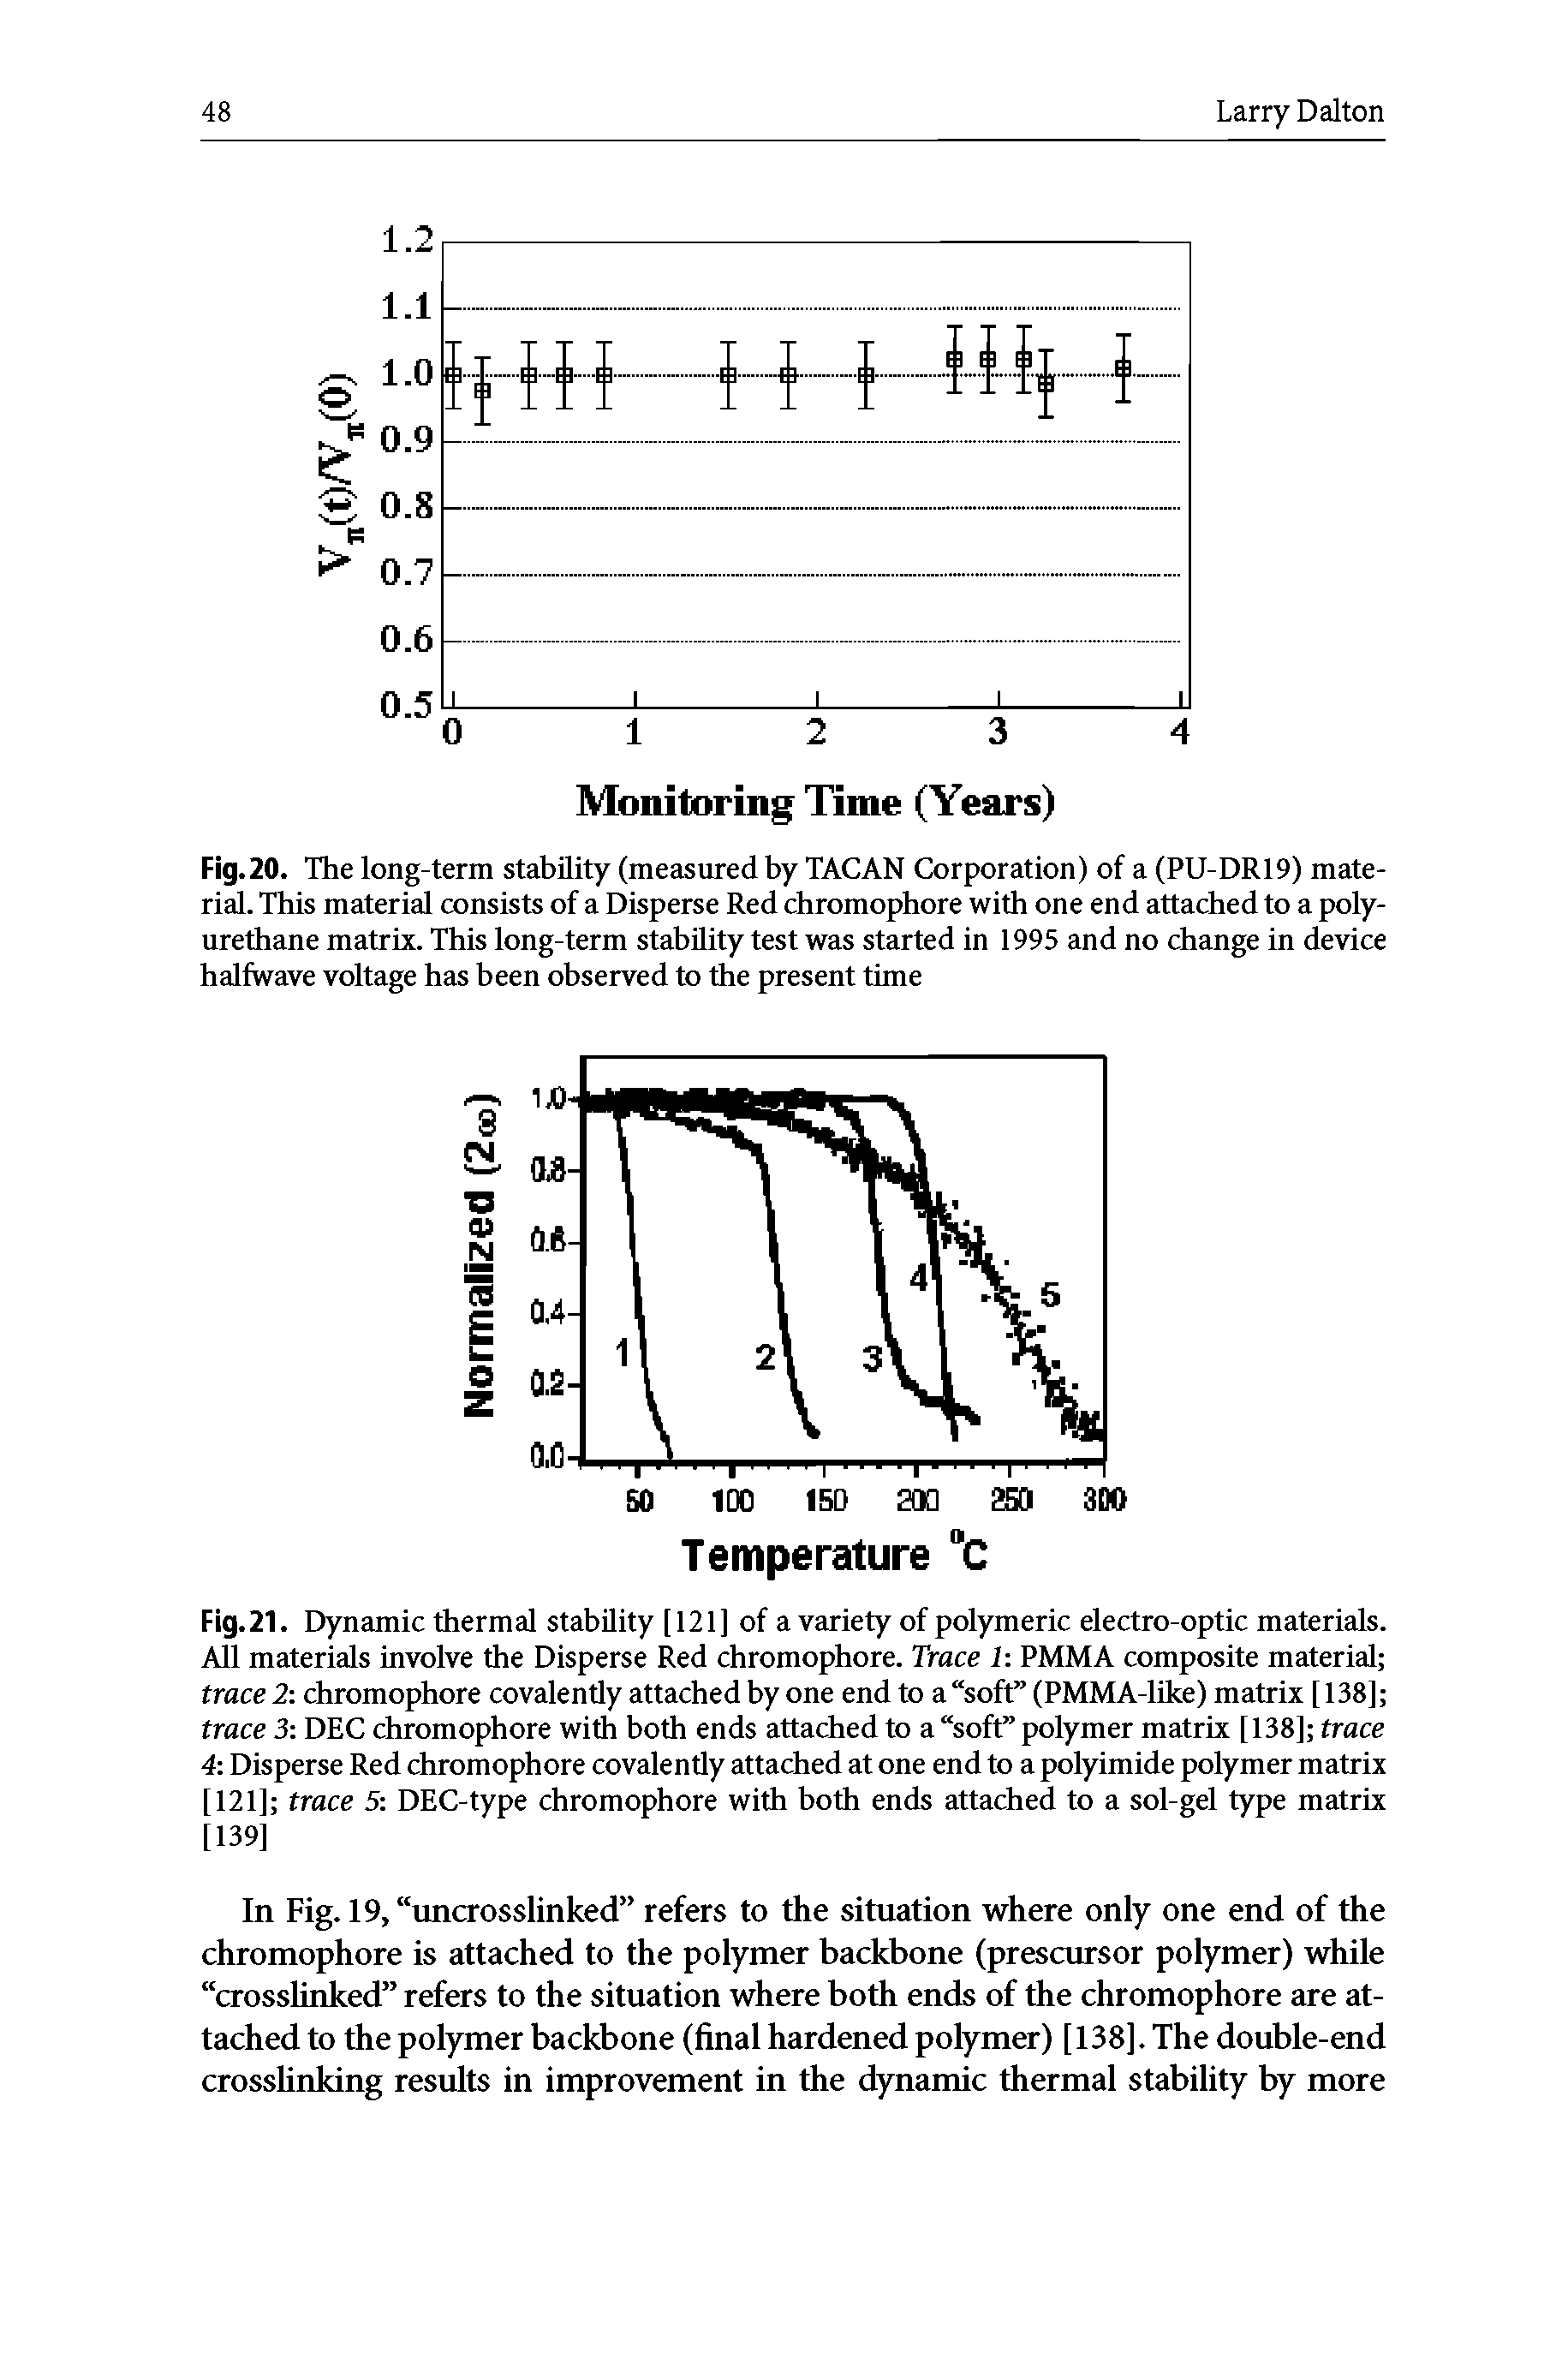 Fig.20. The long-term stability (measured by TACAN Corporation) of a (PU-DR19) material. This material consists of a Disperse Red chromophore with one end attached to a polyurethane matrix. This long-term stability test was started in 1995 and no change in device halfwave voltage has been observed to the present time...